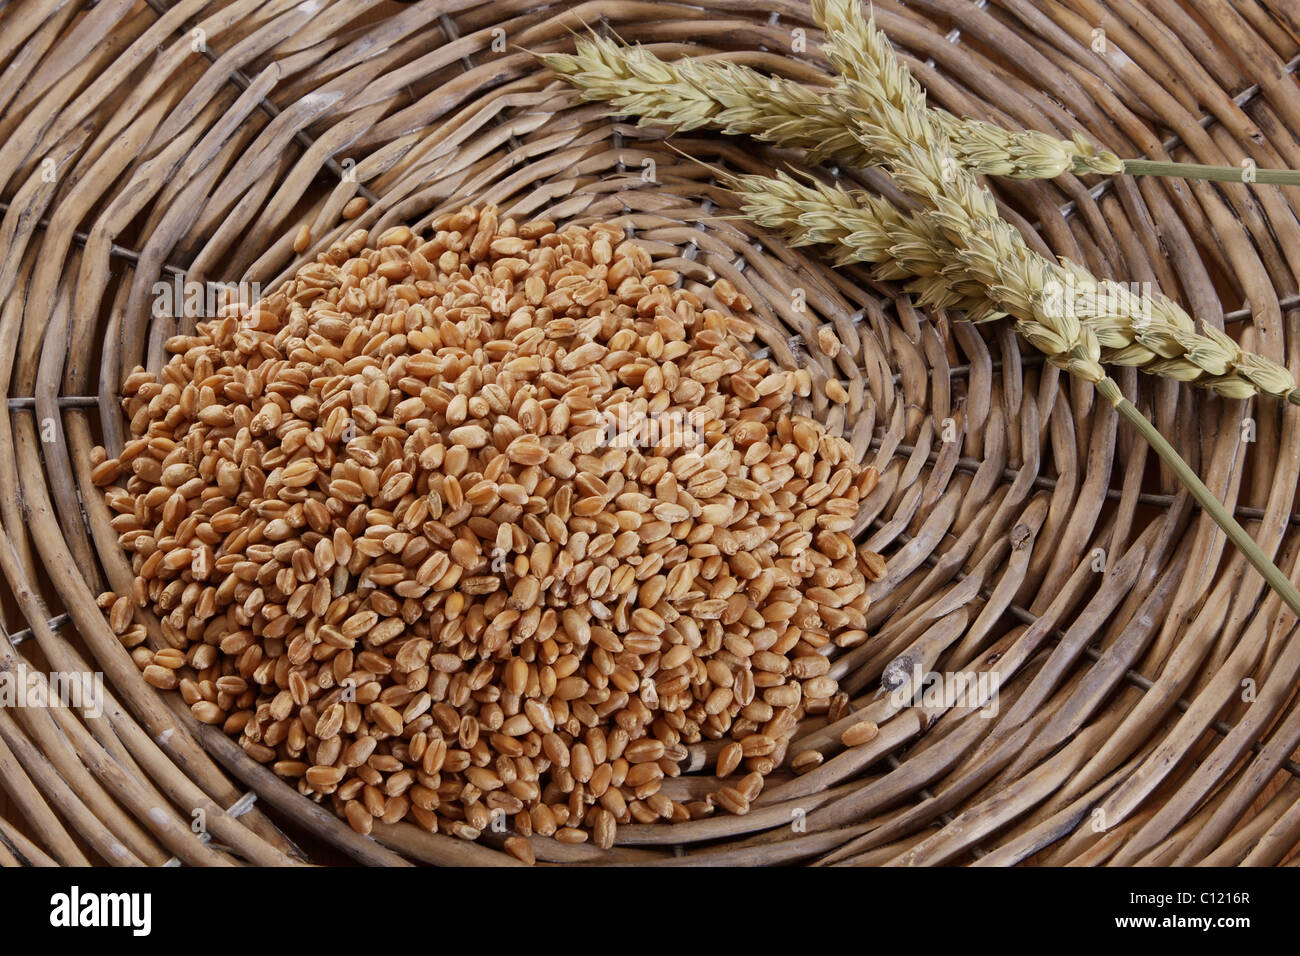 Wheat kernels (Triticum) with wheat ears in a woven basket Stock Photo